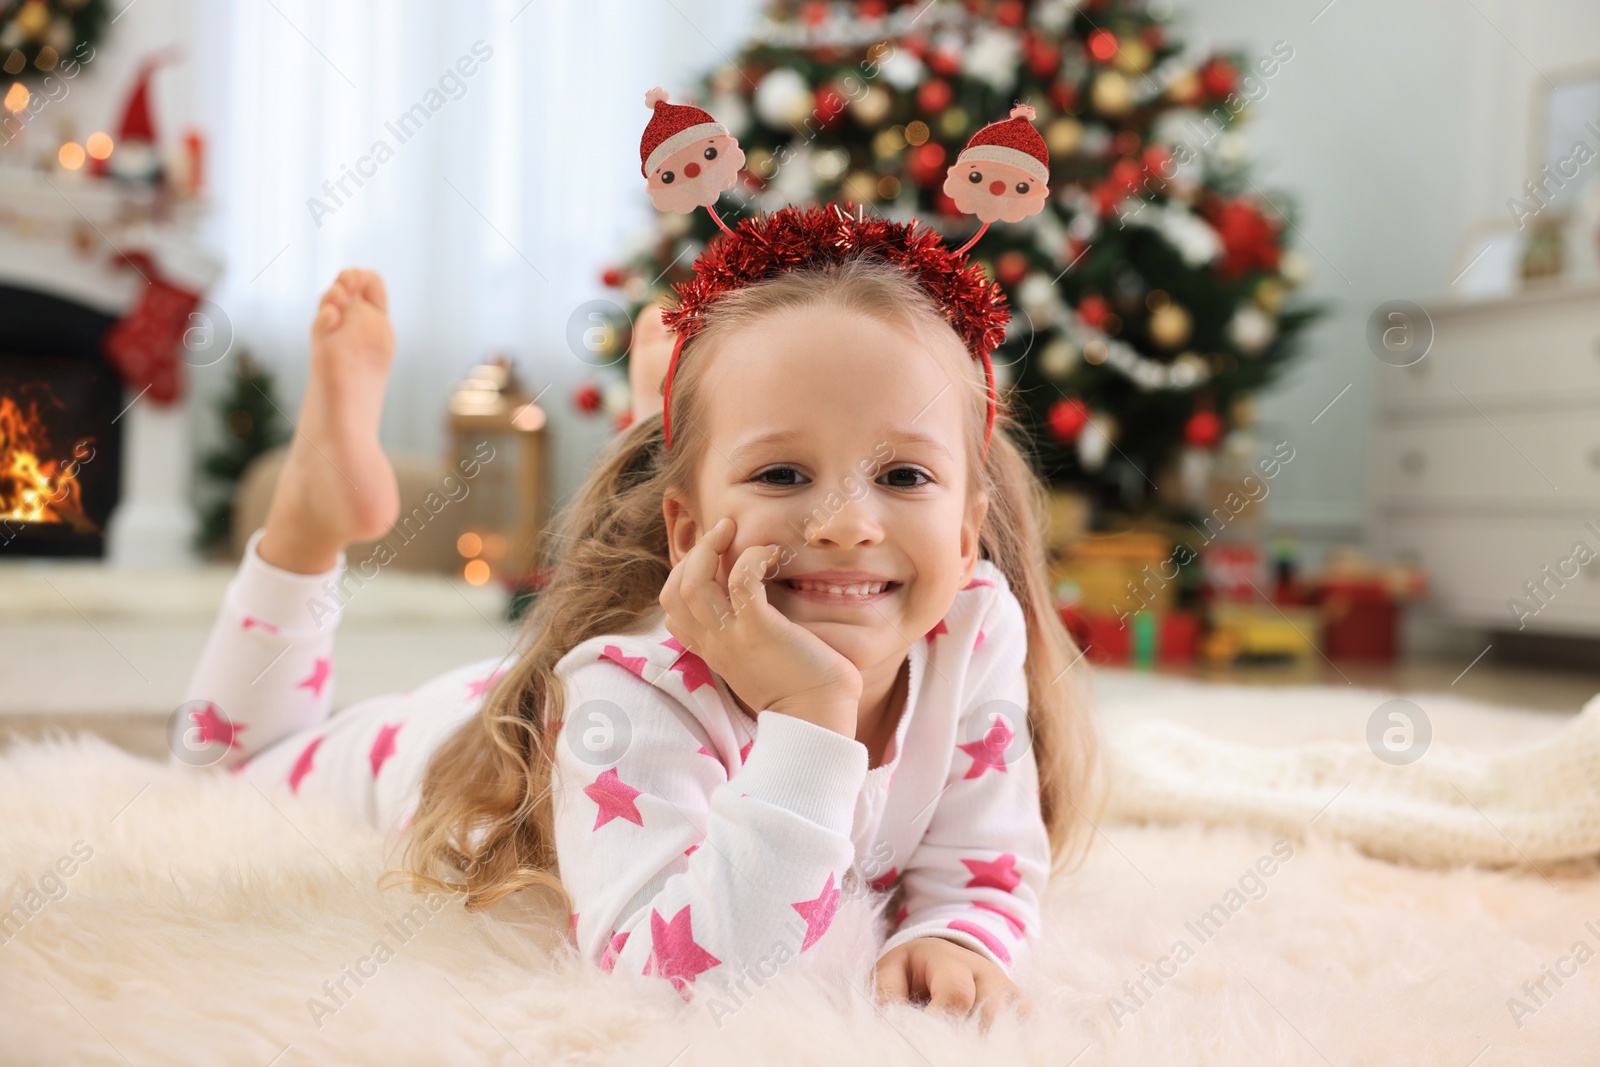 Photo of Cute little girl with festive headband in room decorated for Christmas